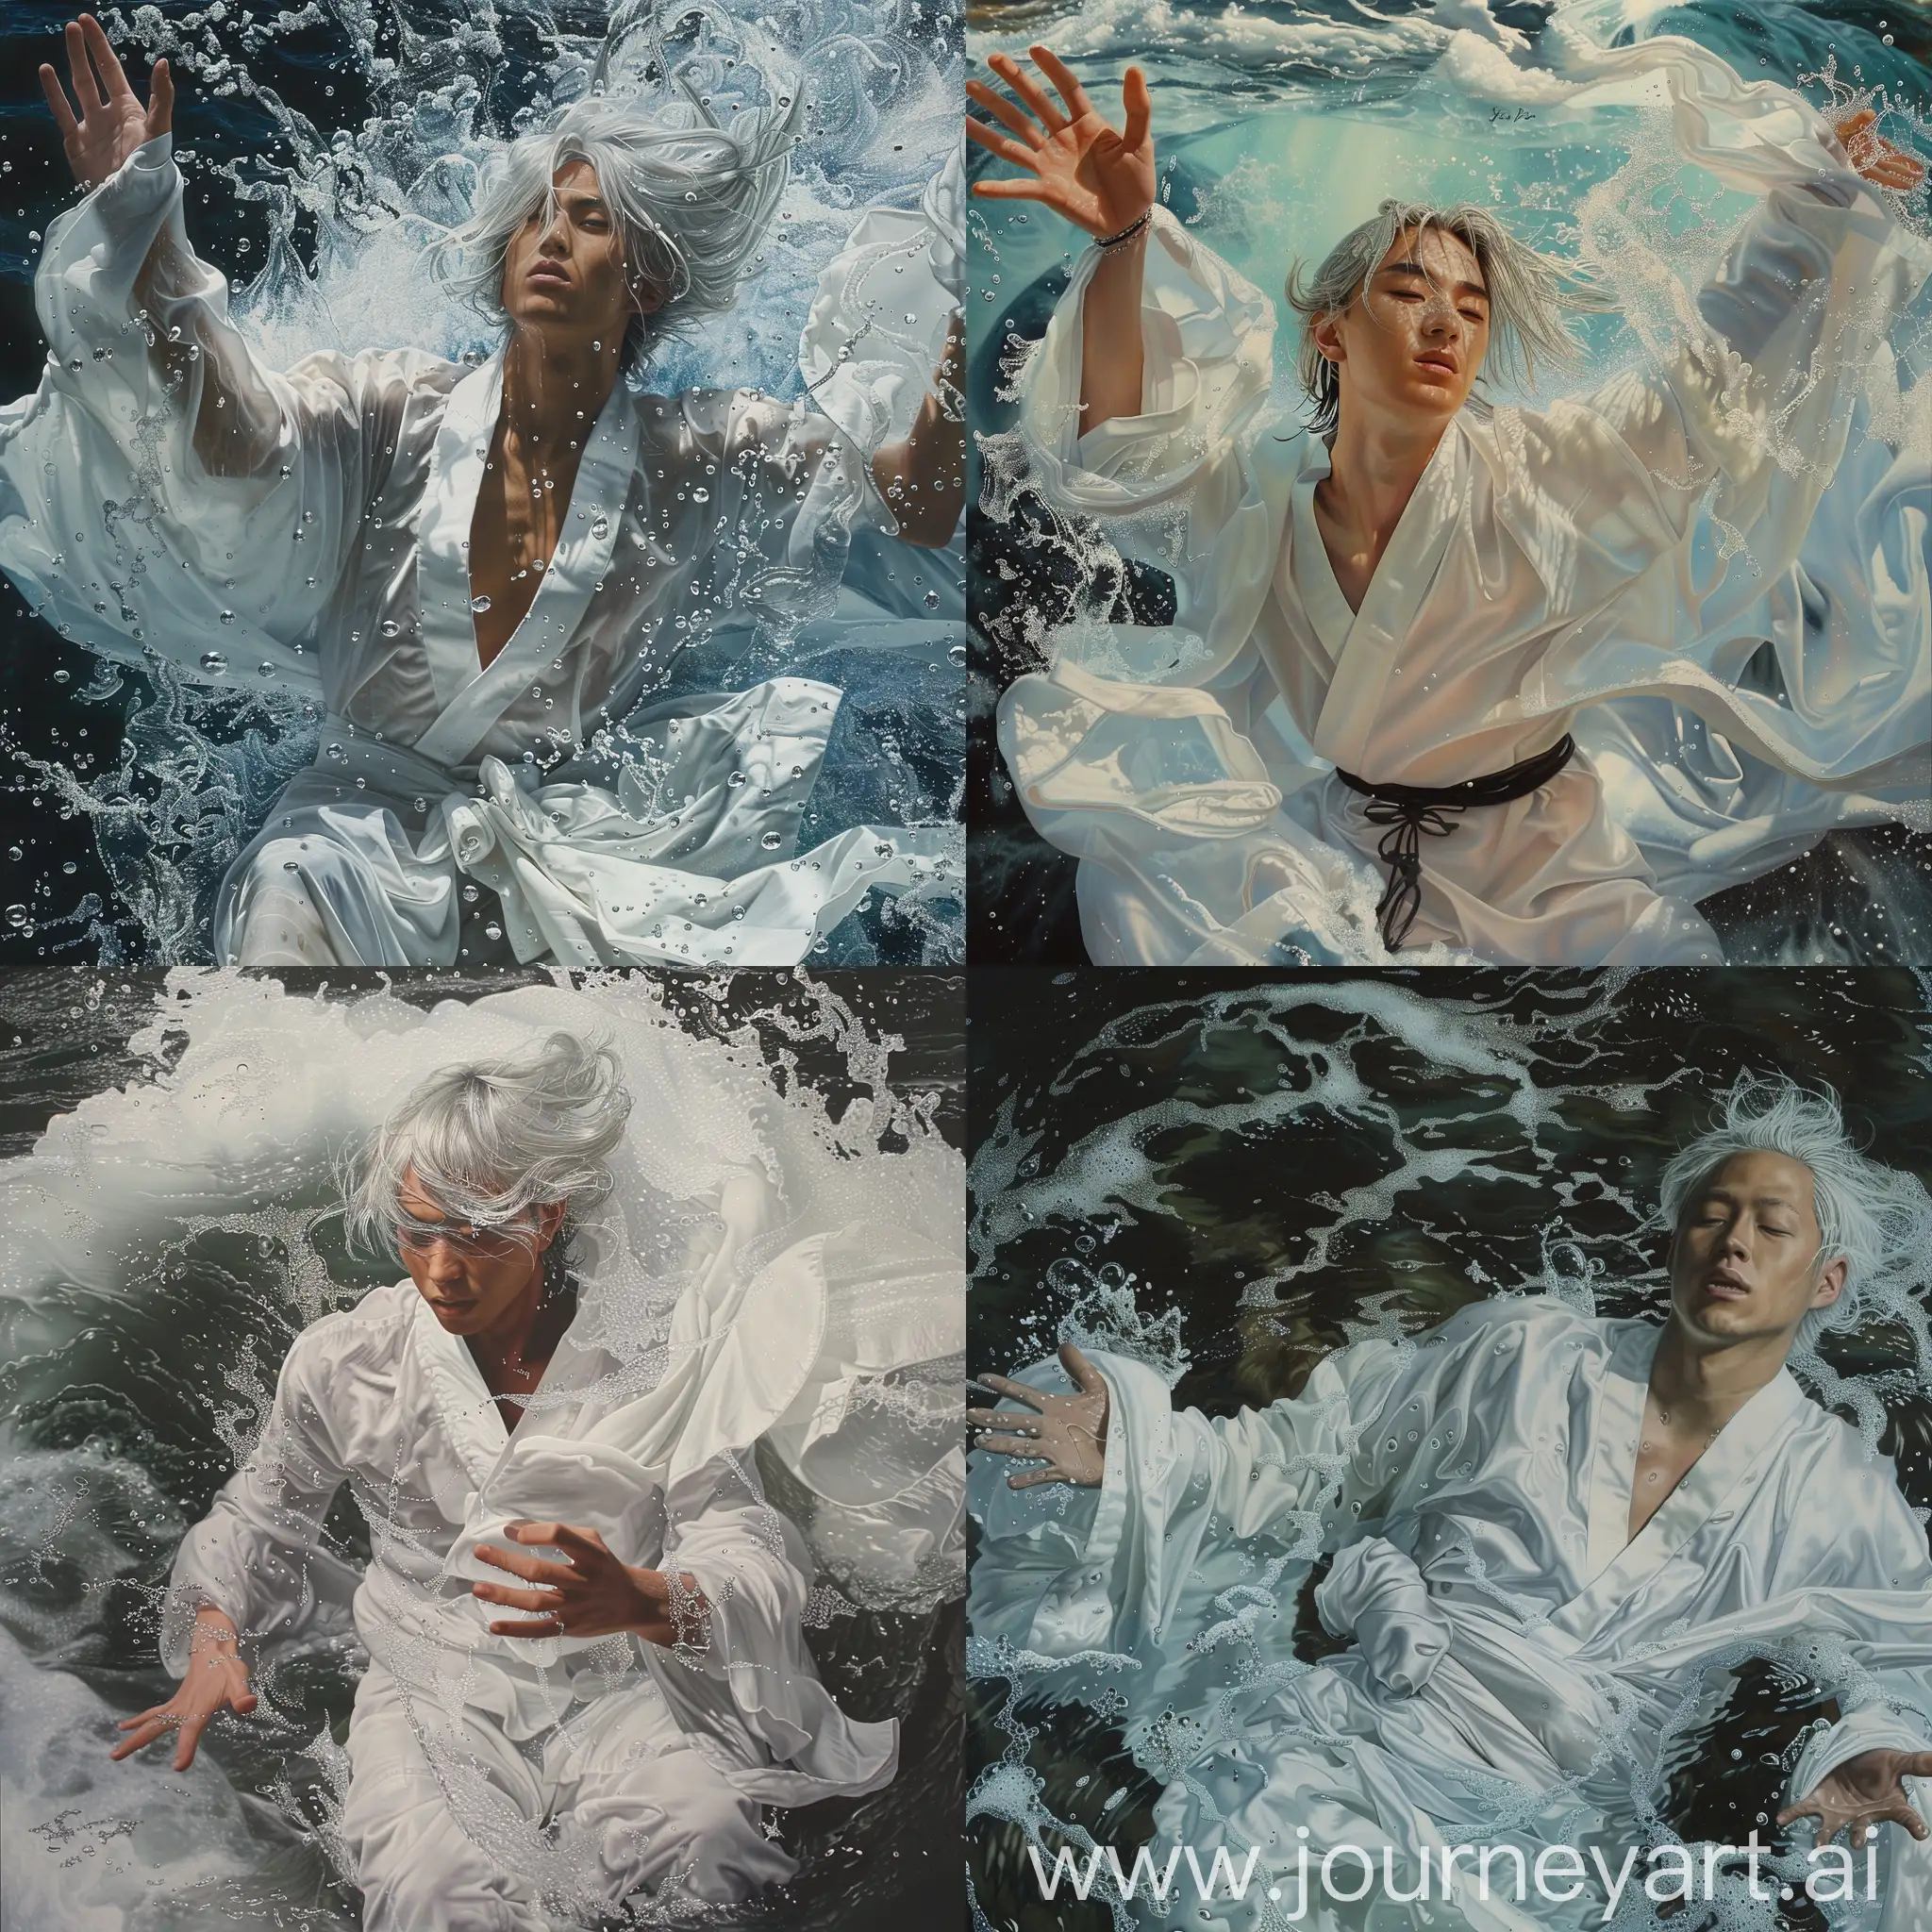 Hyperrealism, a young Asian guy with white thigh-length hair in a white long kimono in a dynamic pose in knee-length water